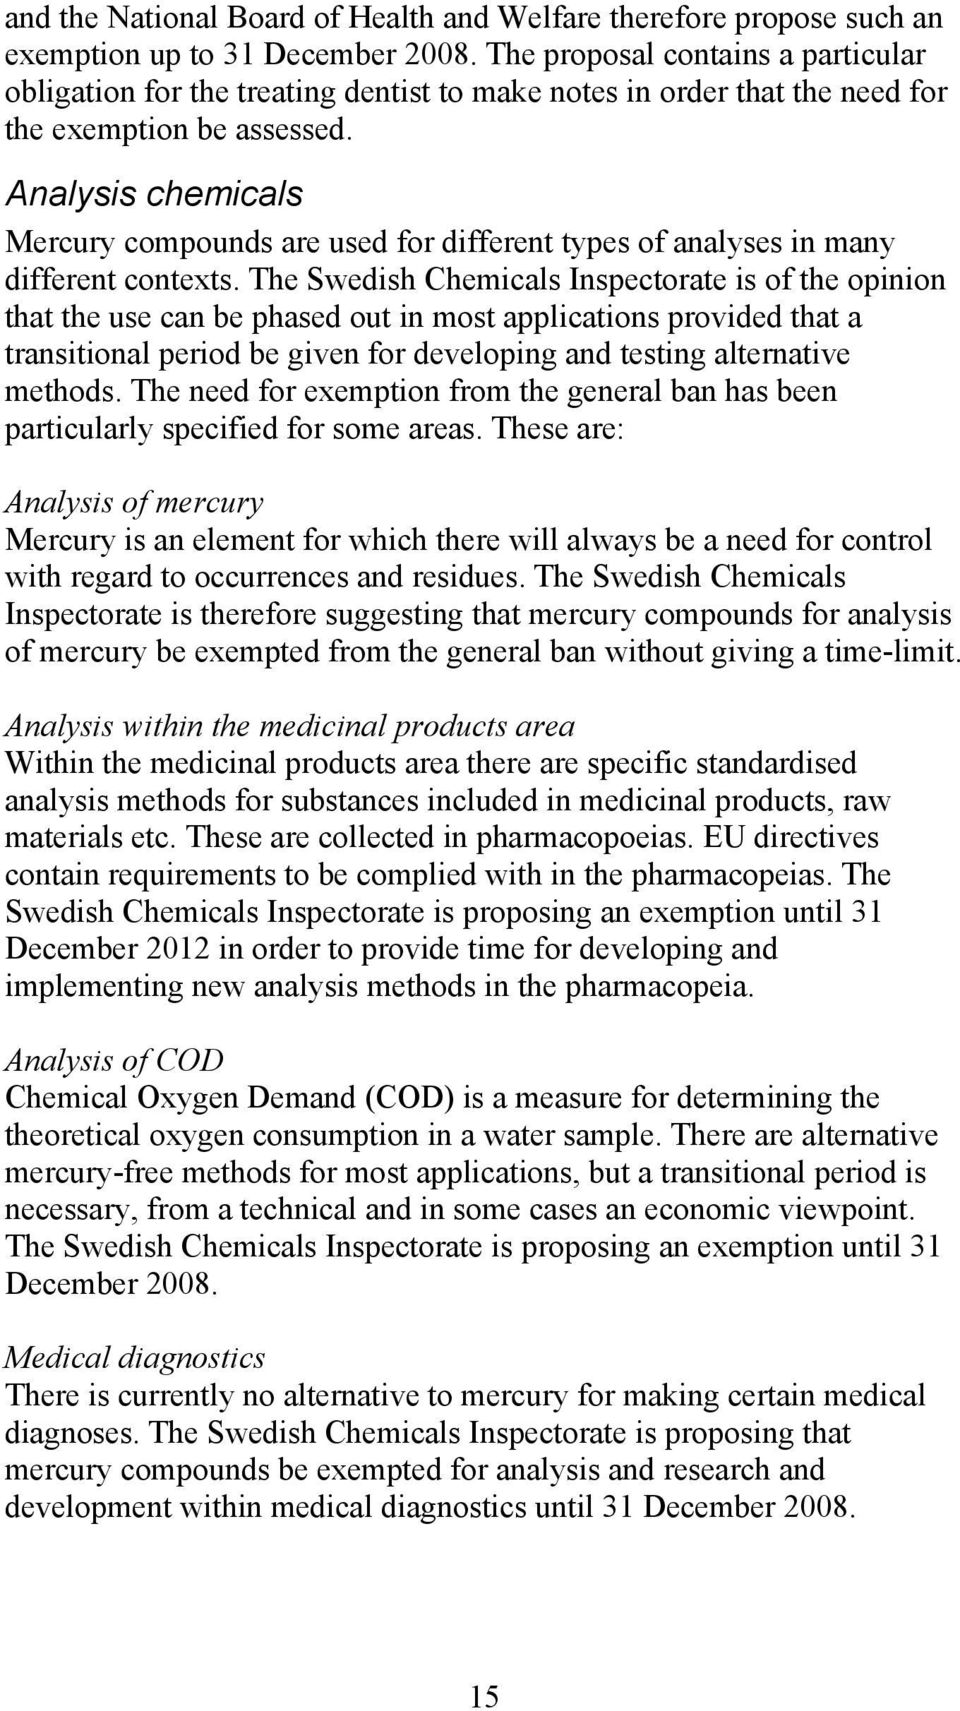 Analysis chemicals Mercury compounds are used for different types of analyses in many different contexts.